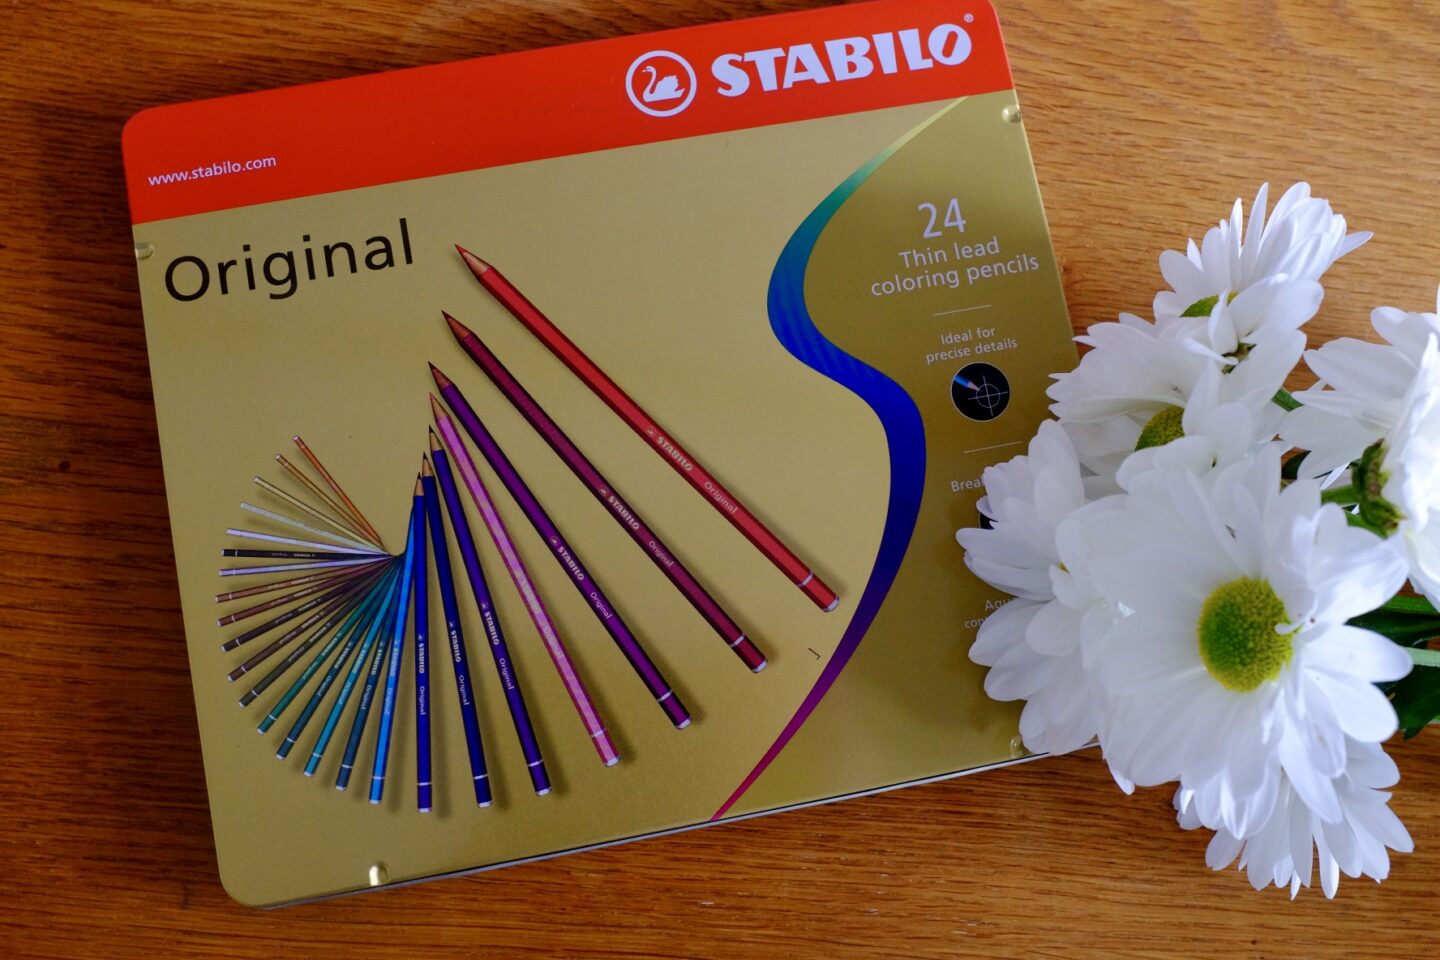 Original thin lead coloured pencil metal box of 24 colours from Stabilo